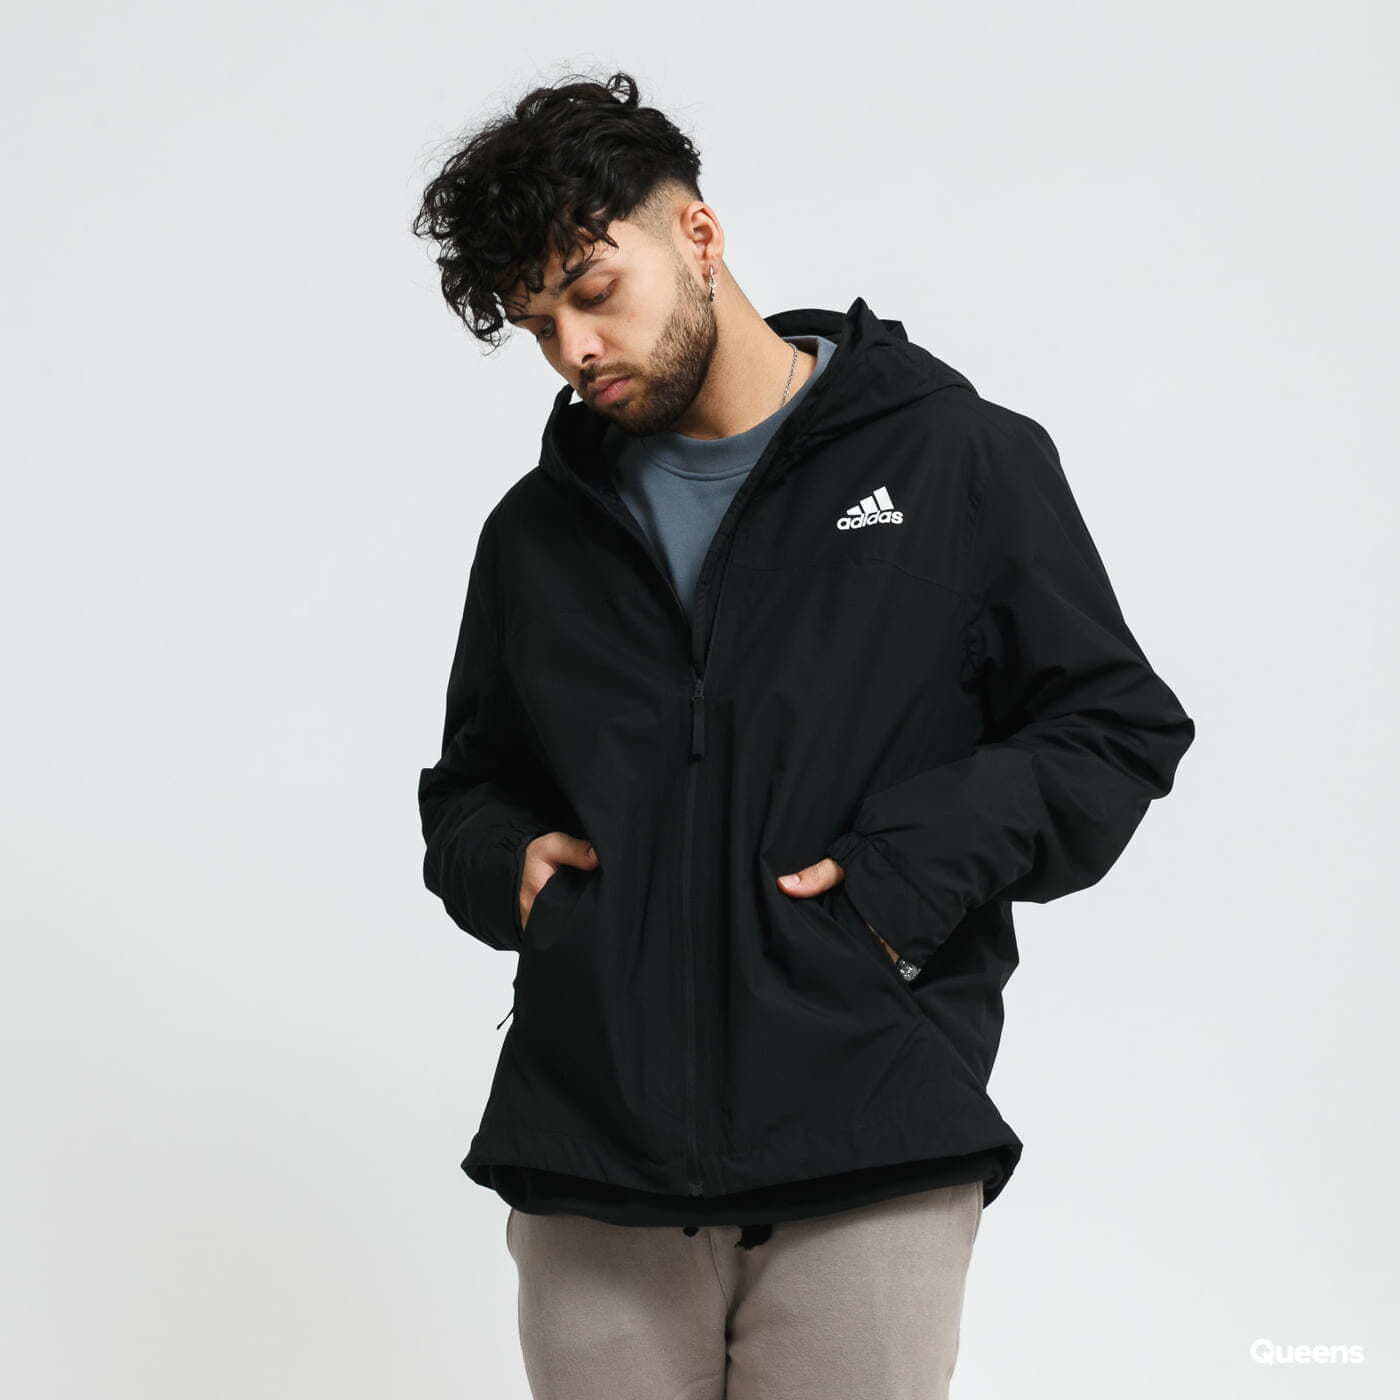 Coach Jackets adidas Performance BSC 3S R.R. Jacket Black | Queens